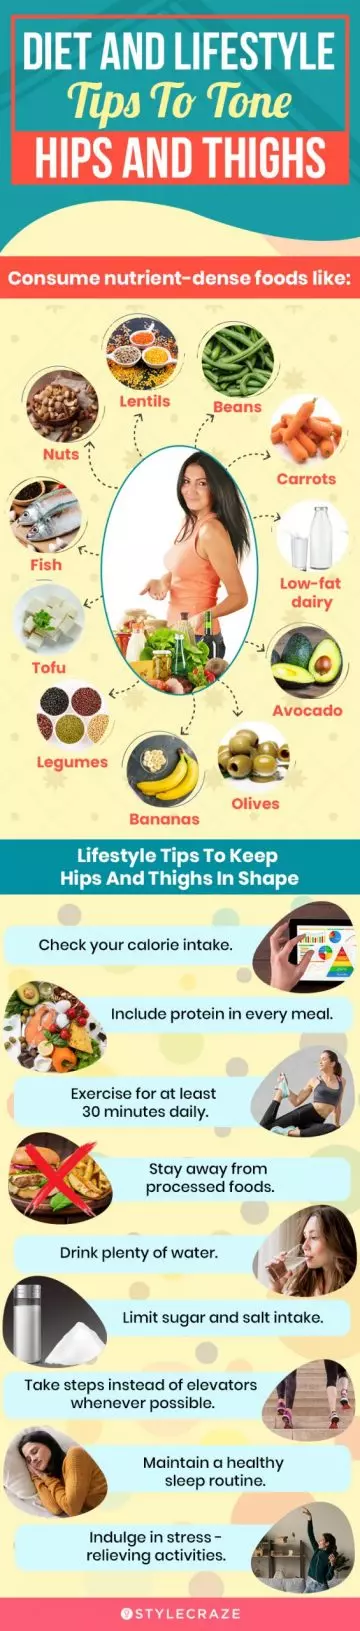 diet and lifestyle tips to tone hips and thighs (infographic)